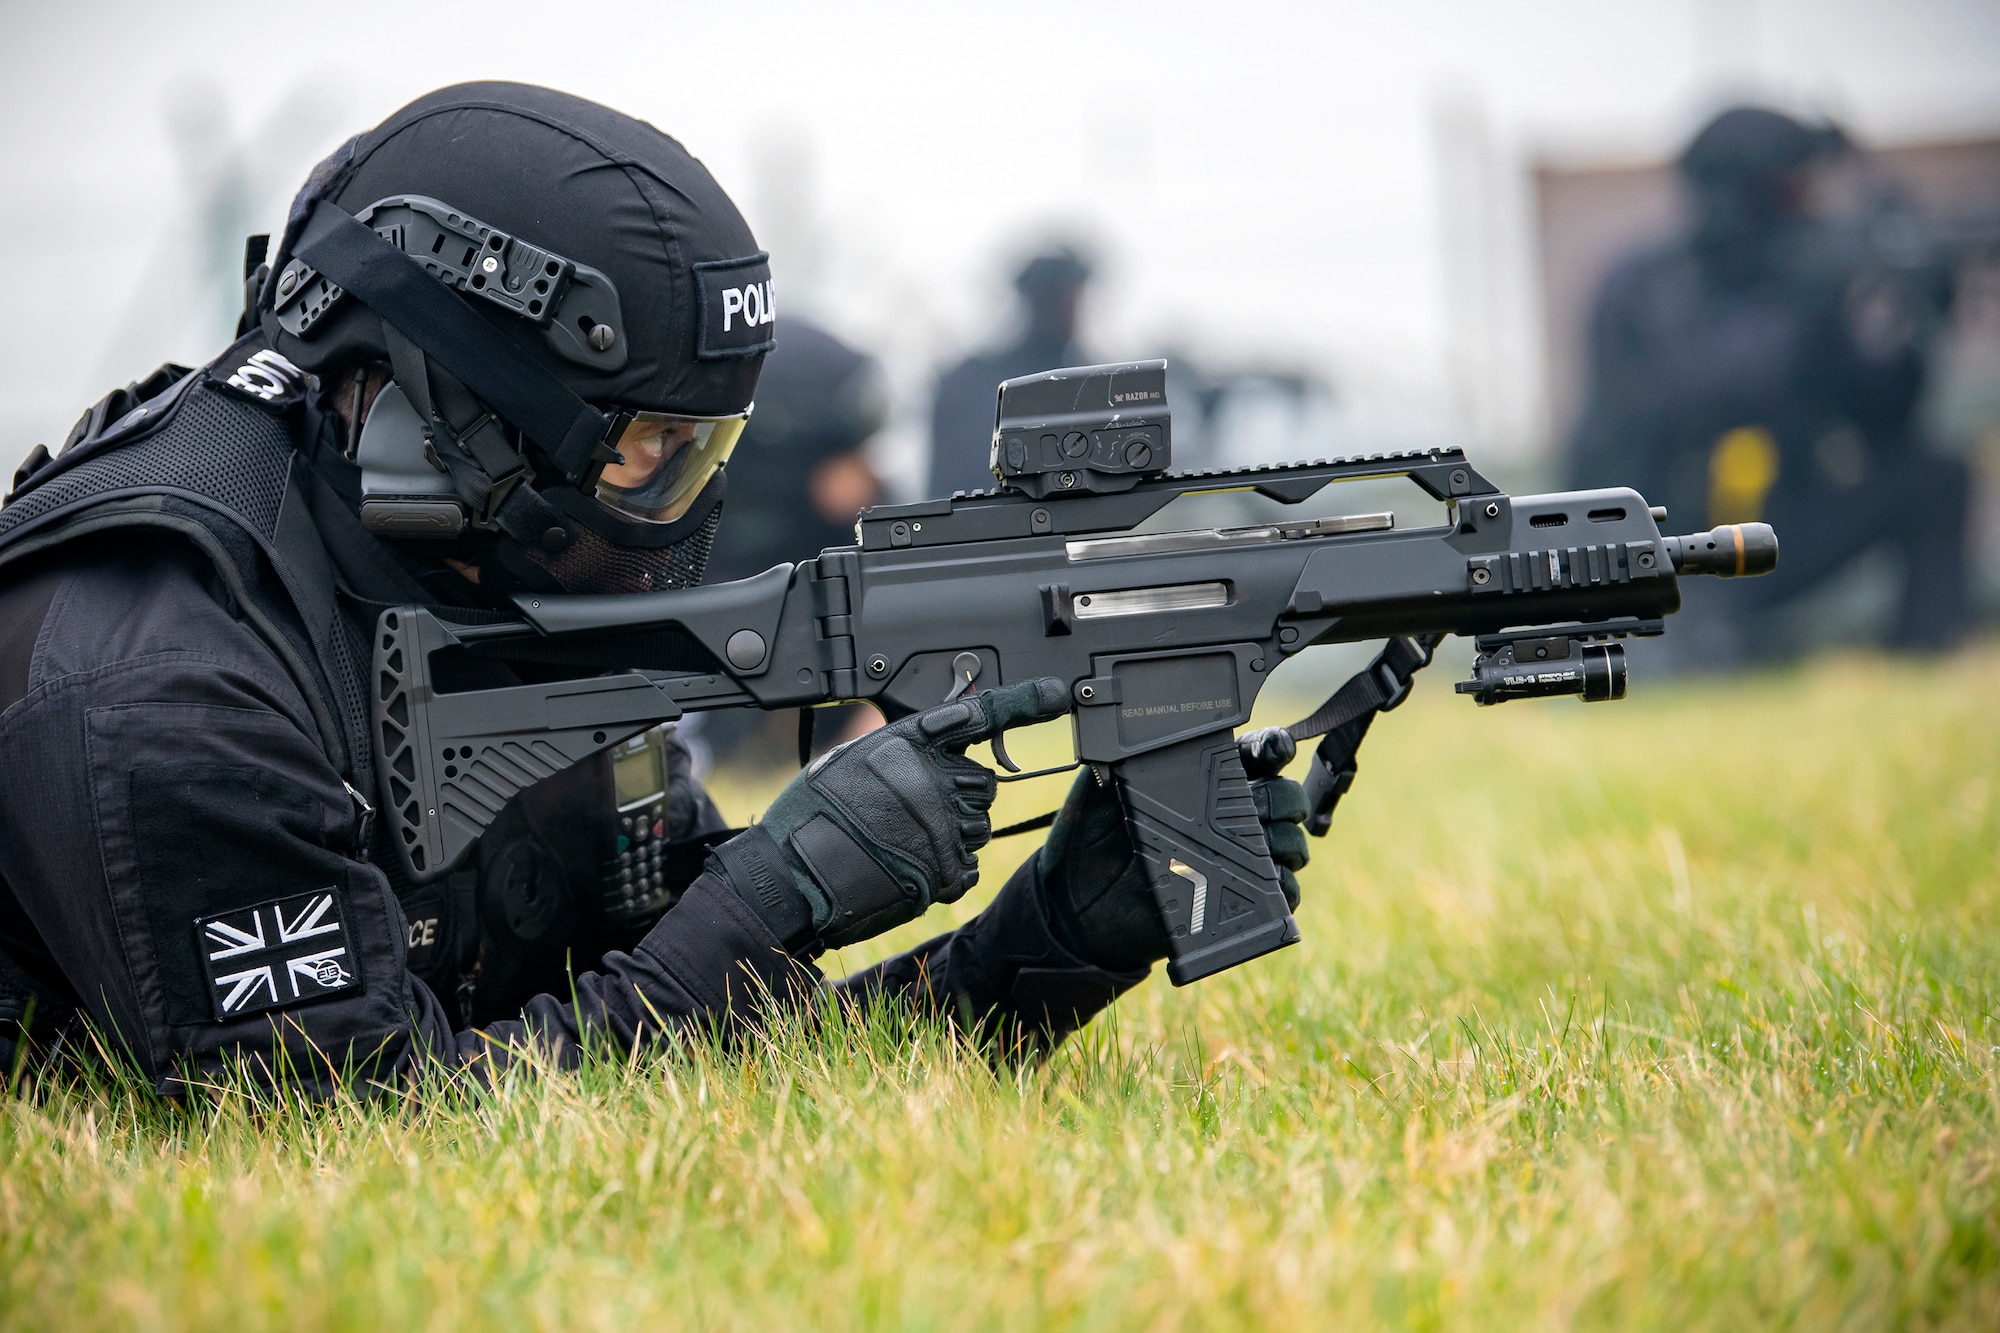 A Policeman from the Northamptonshire Police Department, looks down the sight of a G36 Assault Rifle during a field training exercise at RAF Croughton, England, Mar. 3, 2021. The NHPD utilized the 422d Security Forces Squadron training complex to help strengthen their tactics and techniques. Events like this help strengthen the local partnership between the 422d SFS and the NHPD. (U.S. Air Force photo by Senior Airman Eugene Oliver)